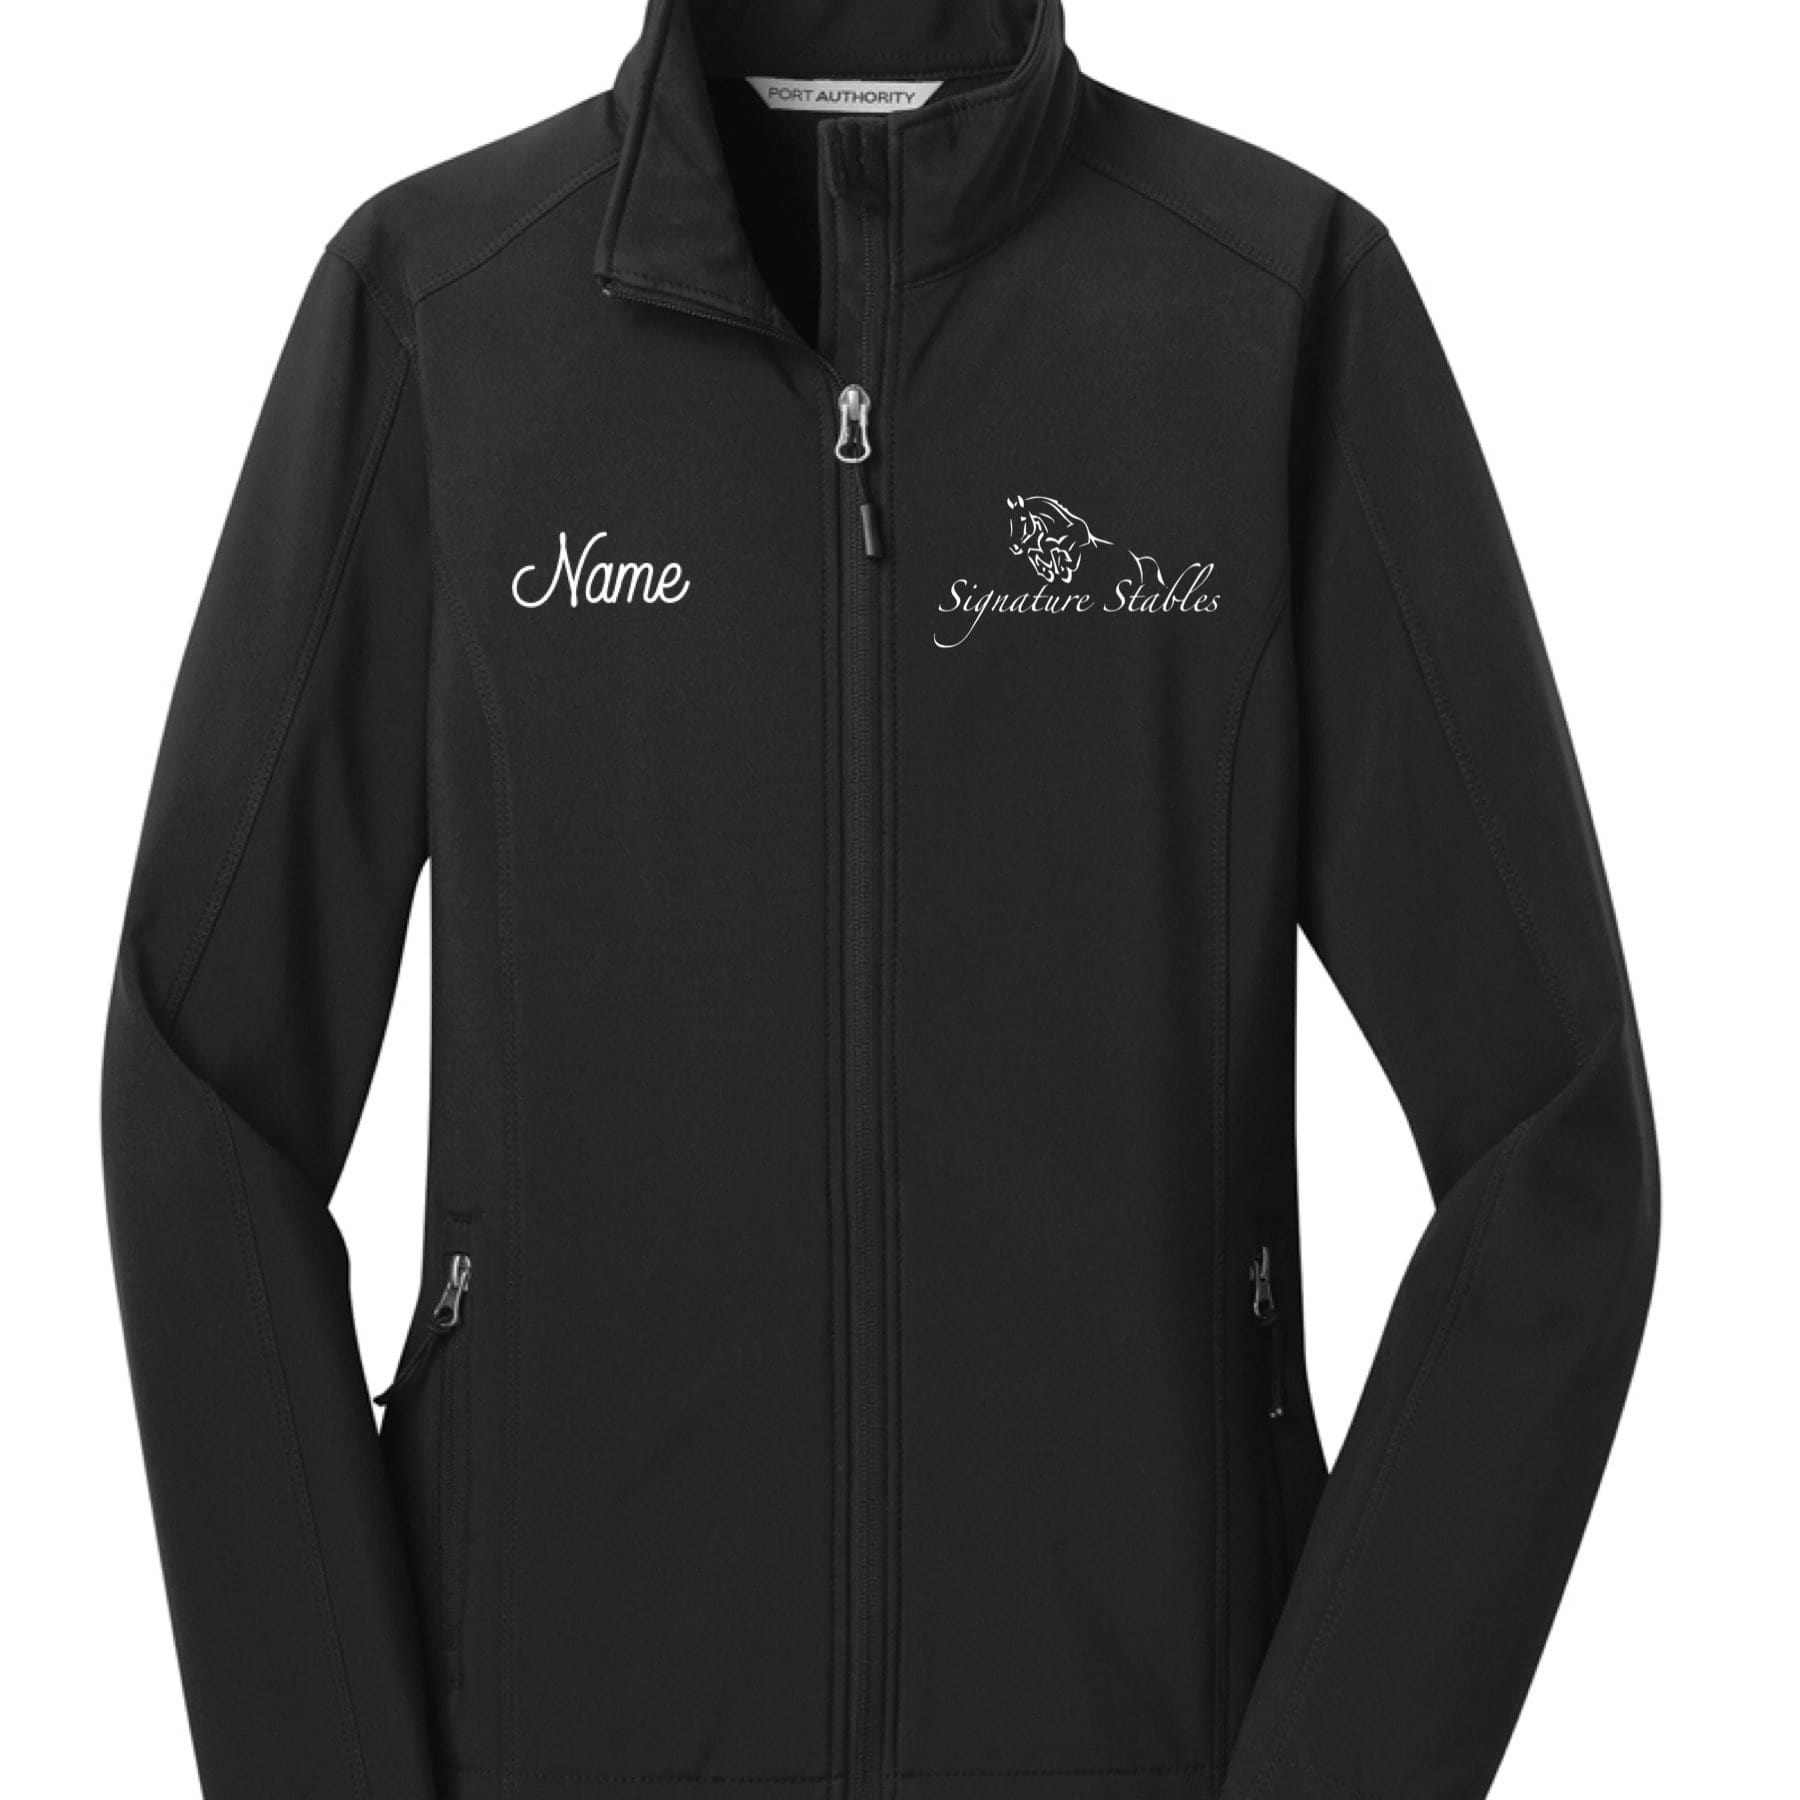 Equestrian Team Apparel Signature Stables Shell Jacket equestrian team apparel online tack store mobile tack store custom farm apparel custom show stable clothing equestrian lifestyle horse show clothing riding clothes horses equestrian tack store